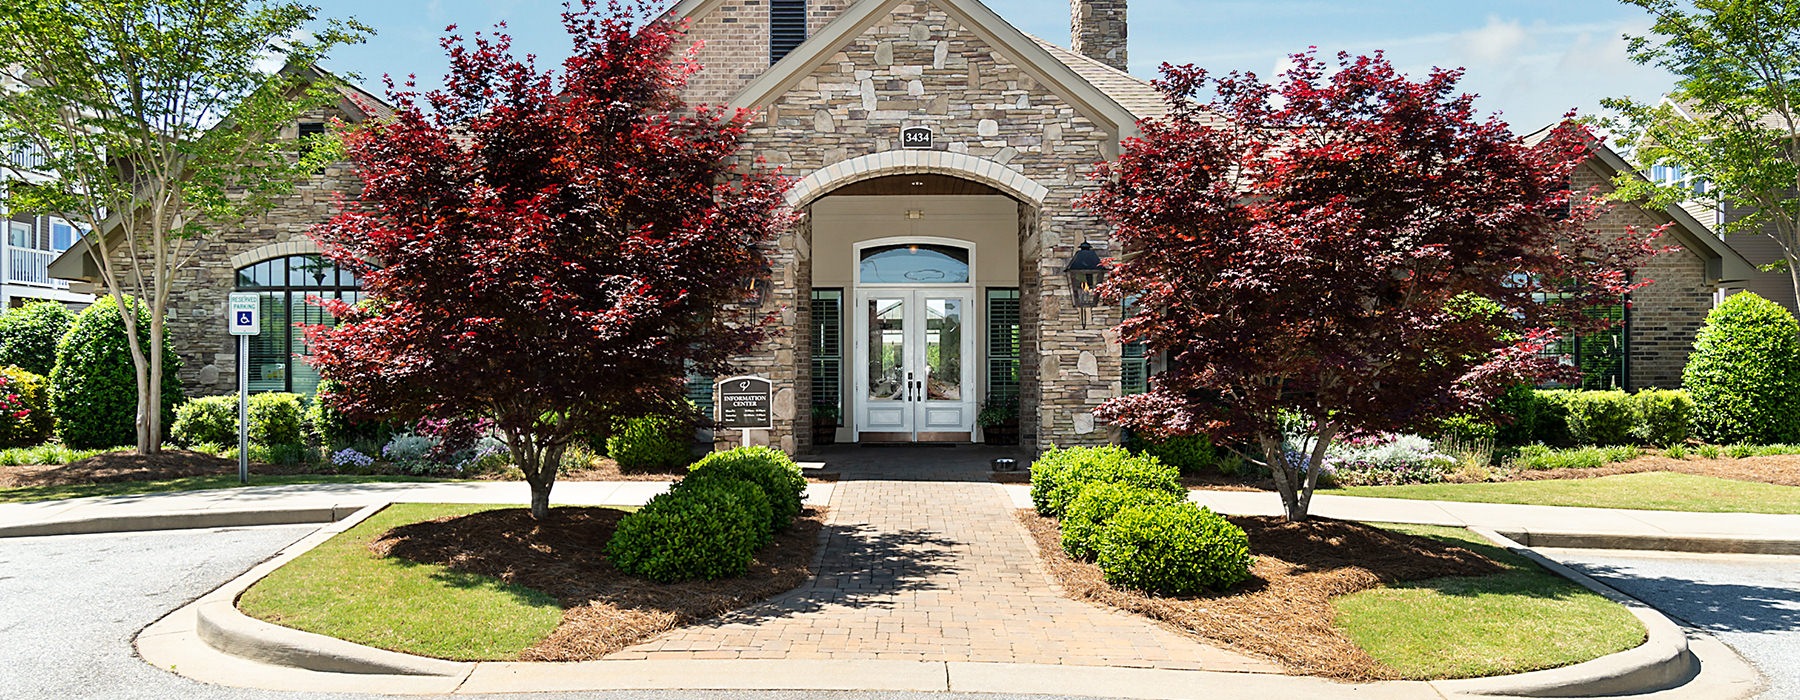 Exterior View of The Vinings at Laurel Creek's Clubhouse